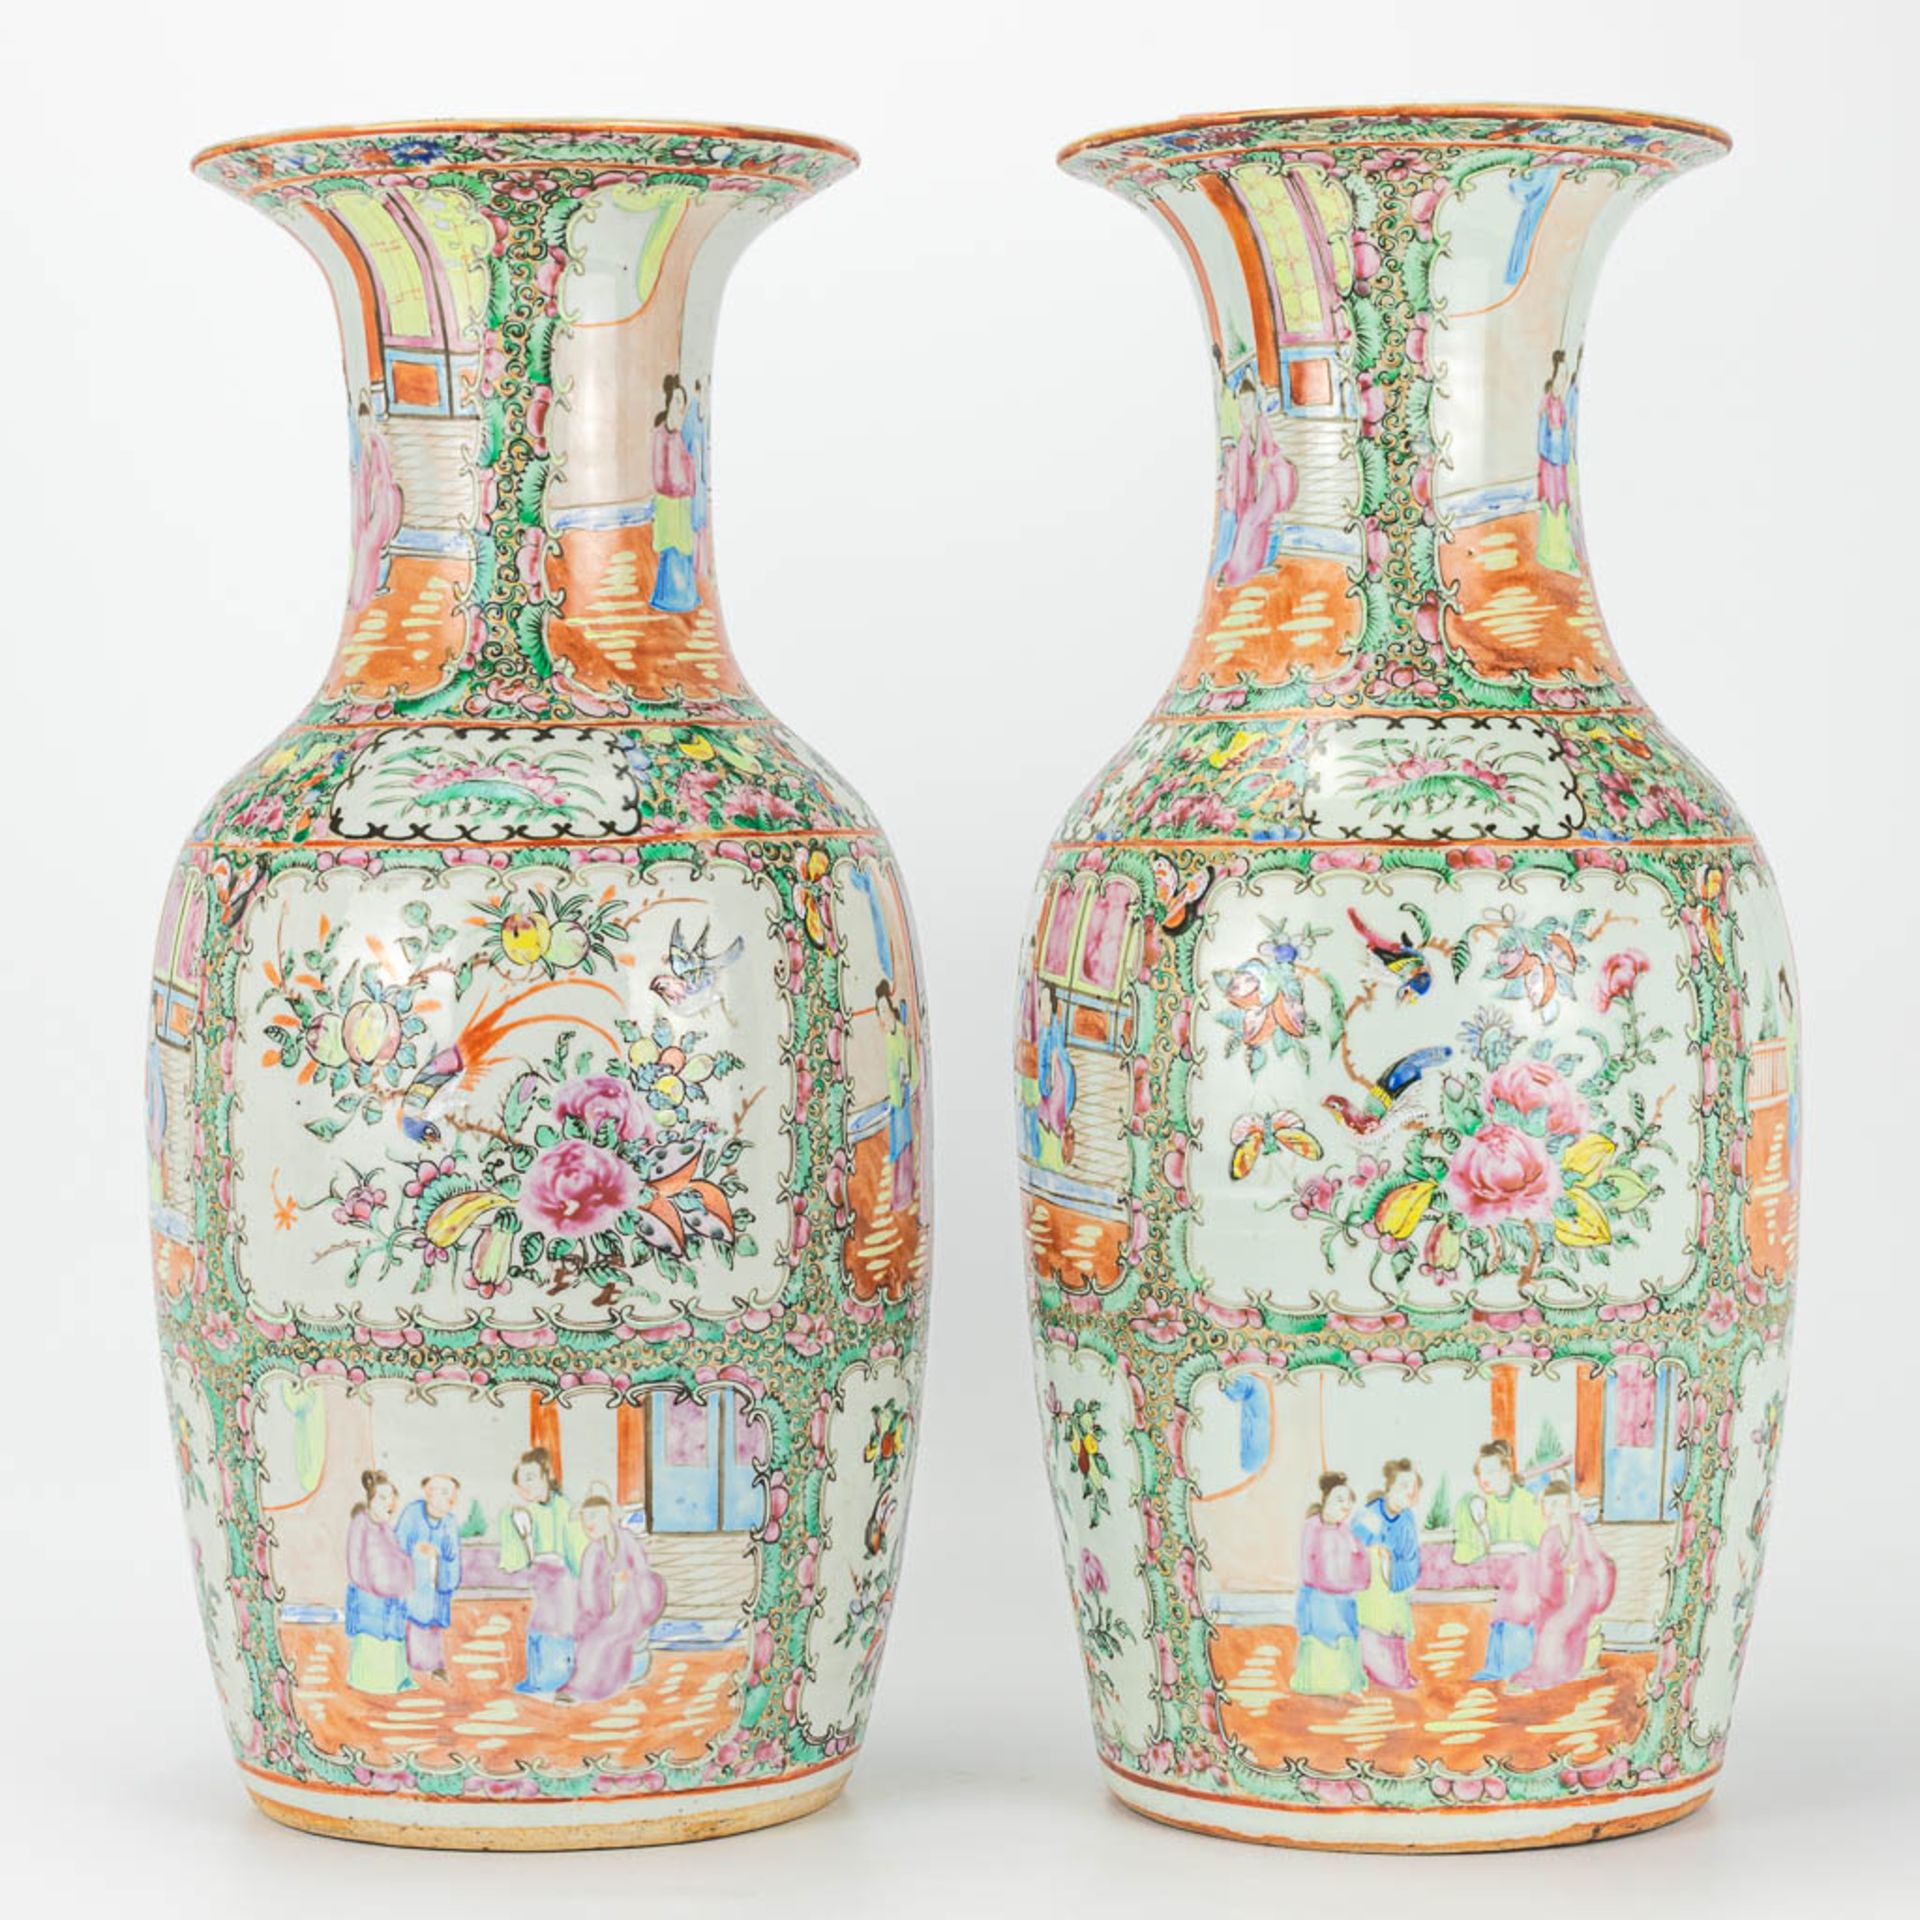 A pair of vases made of Chinese porcelain in Canton style. 19th century. - Image 14 of 17